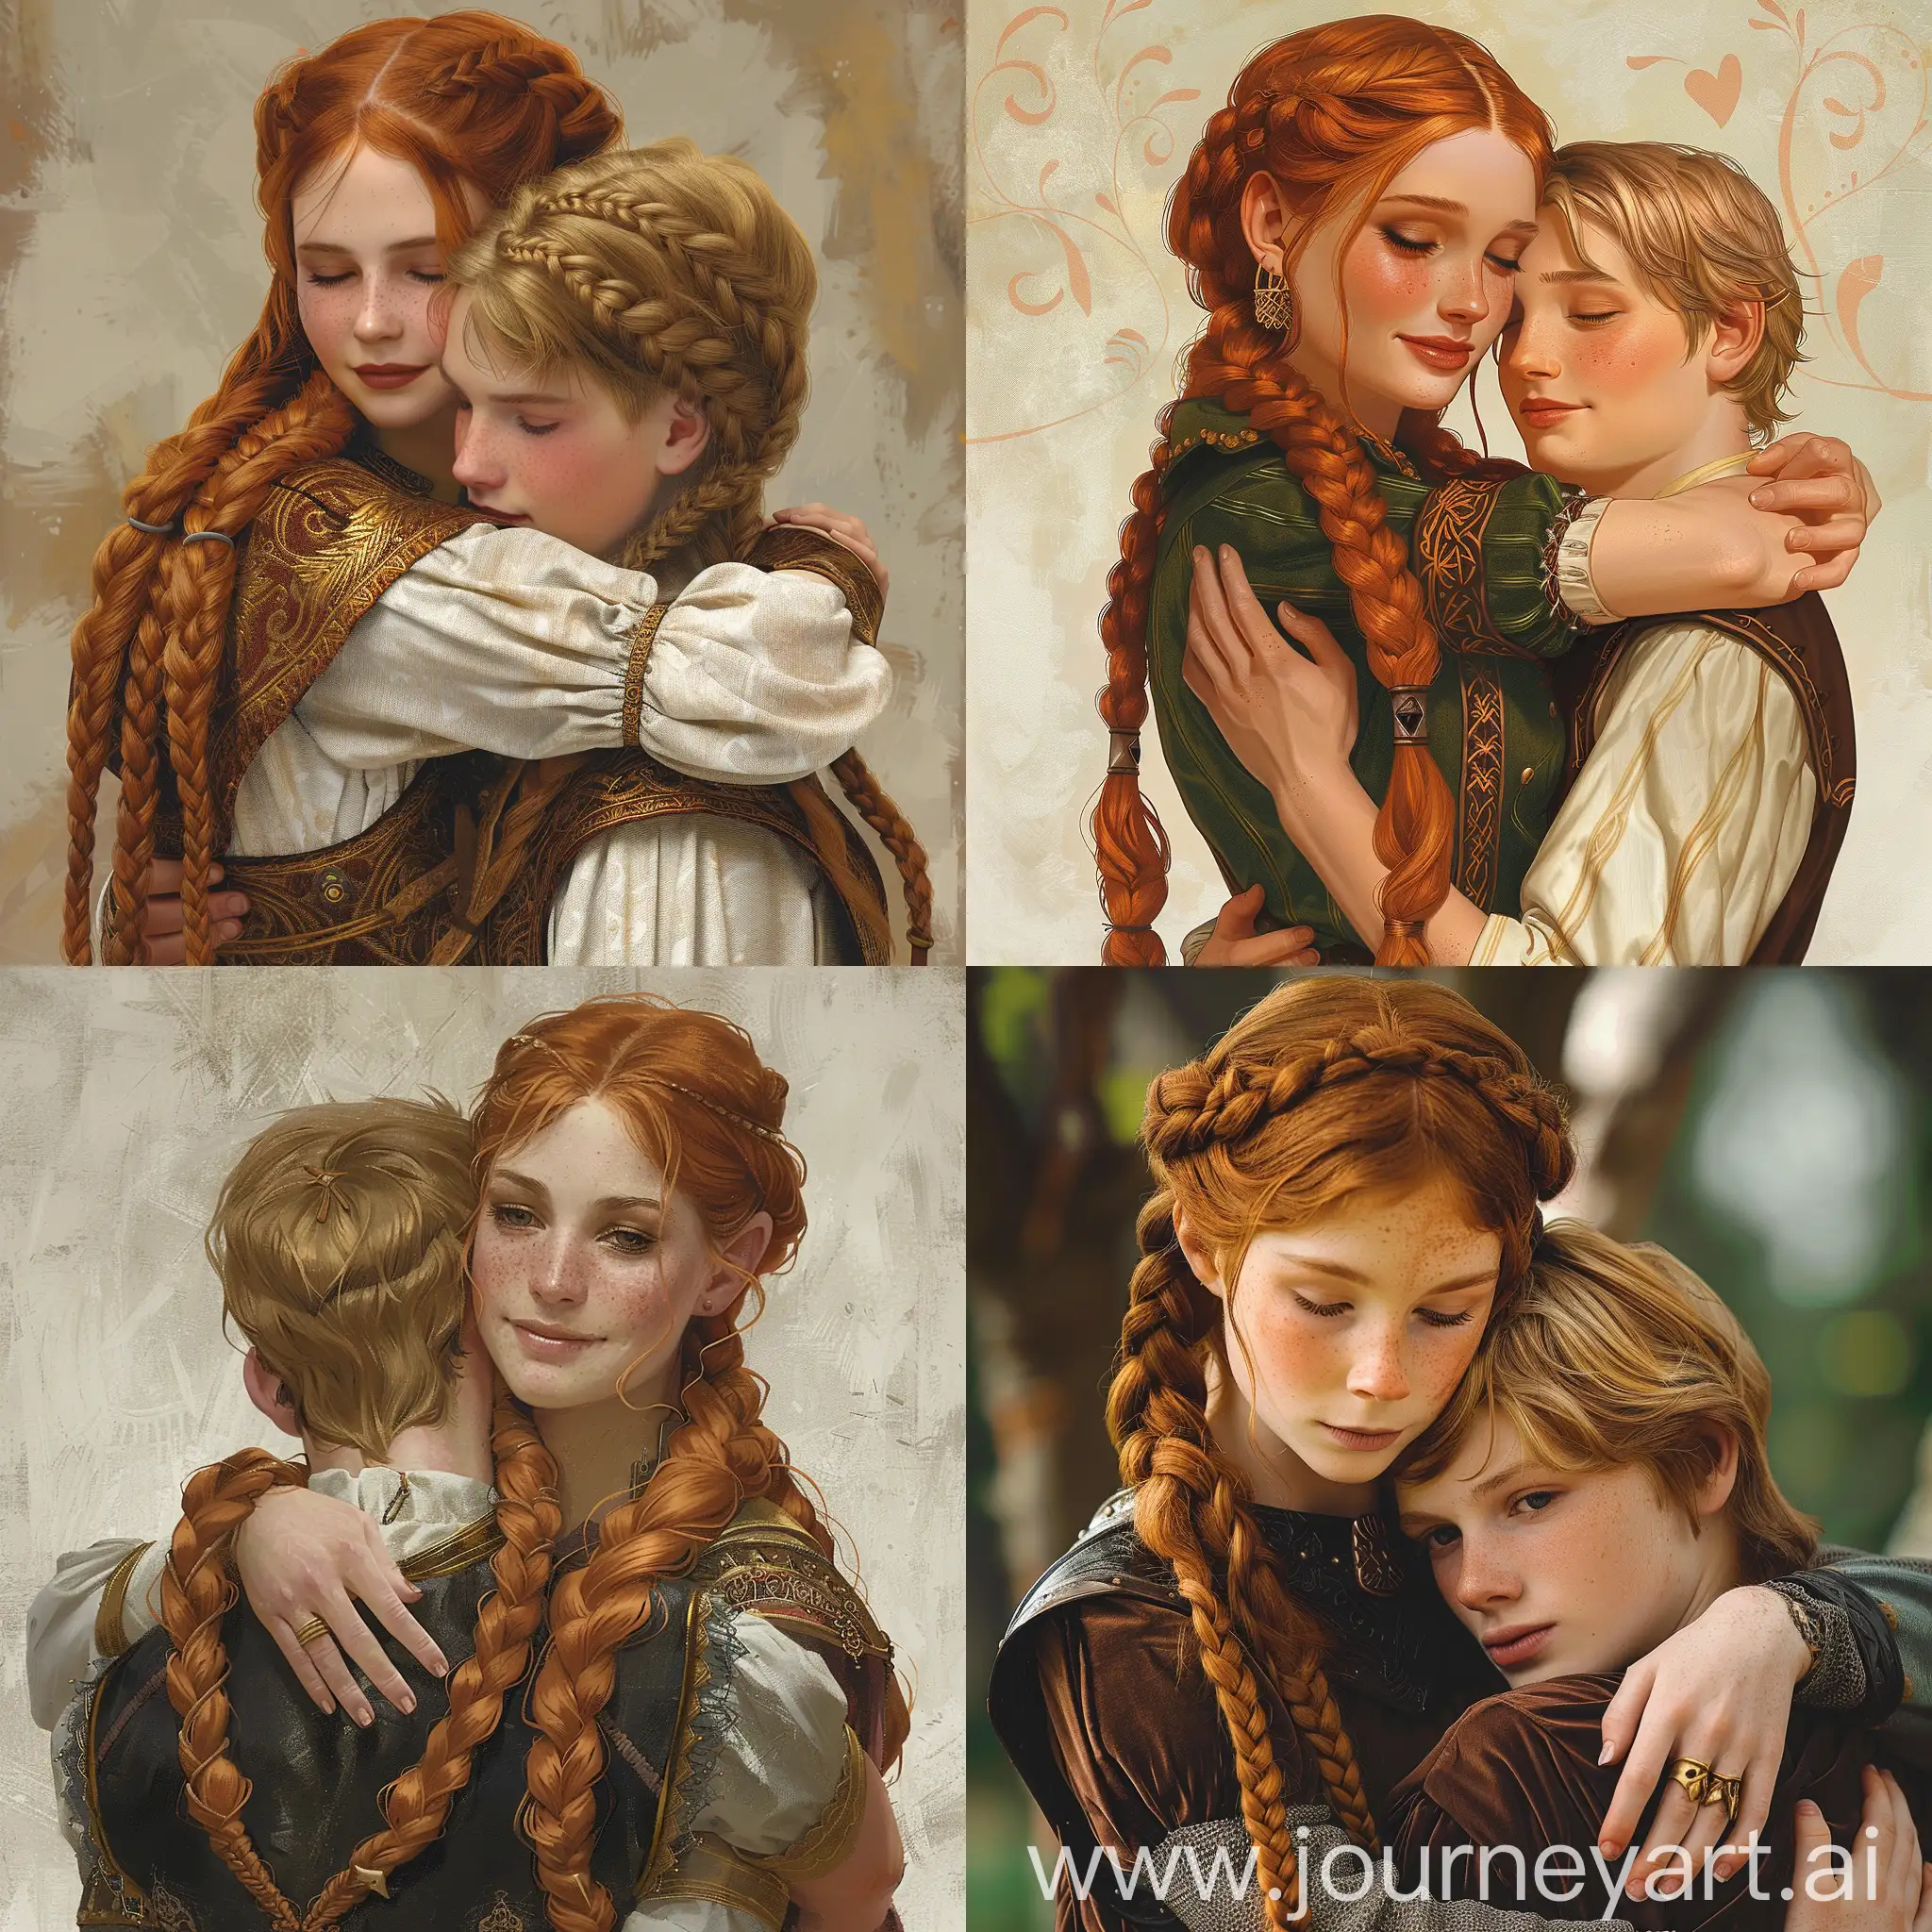 In the style of a medieval romance novel book cover. A young 25 year old woman, attractive, with ginger hair in long double braids. Seductive outfit. She is hugging 25 year old young man with blonde hair.